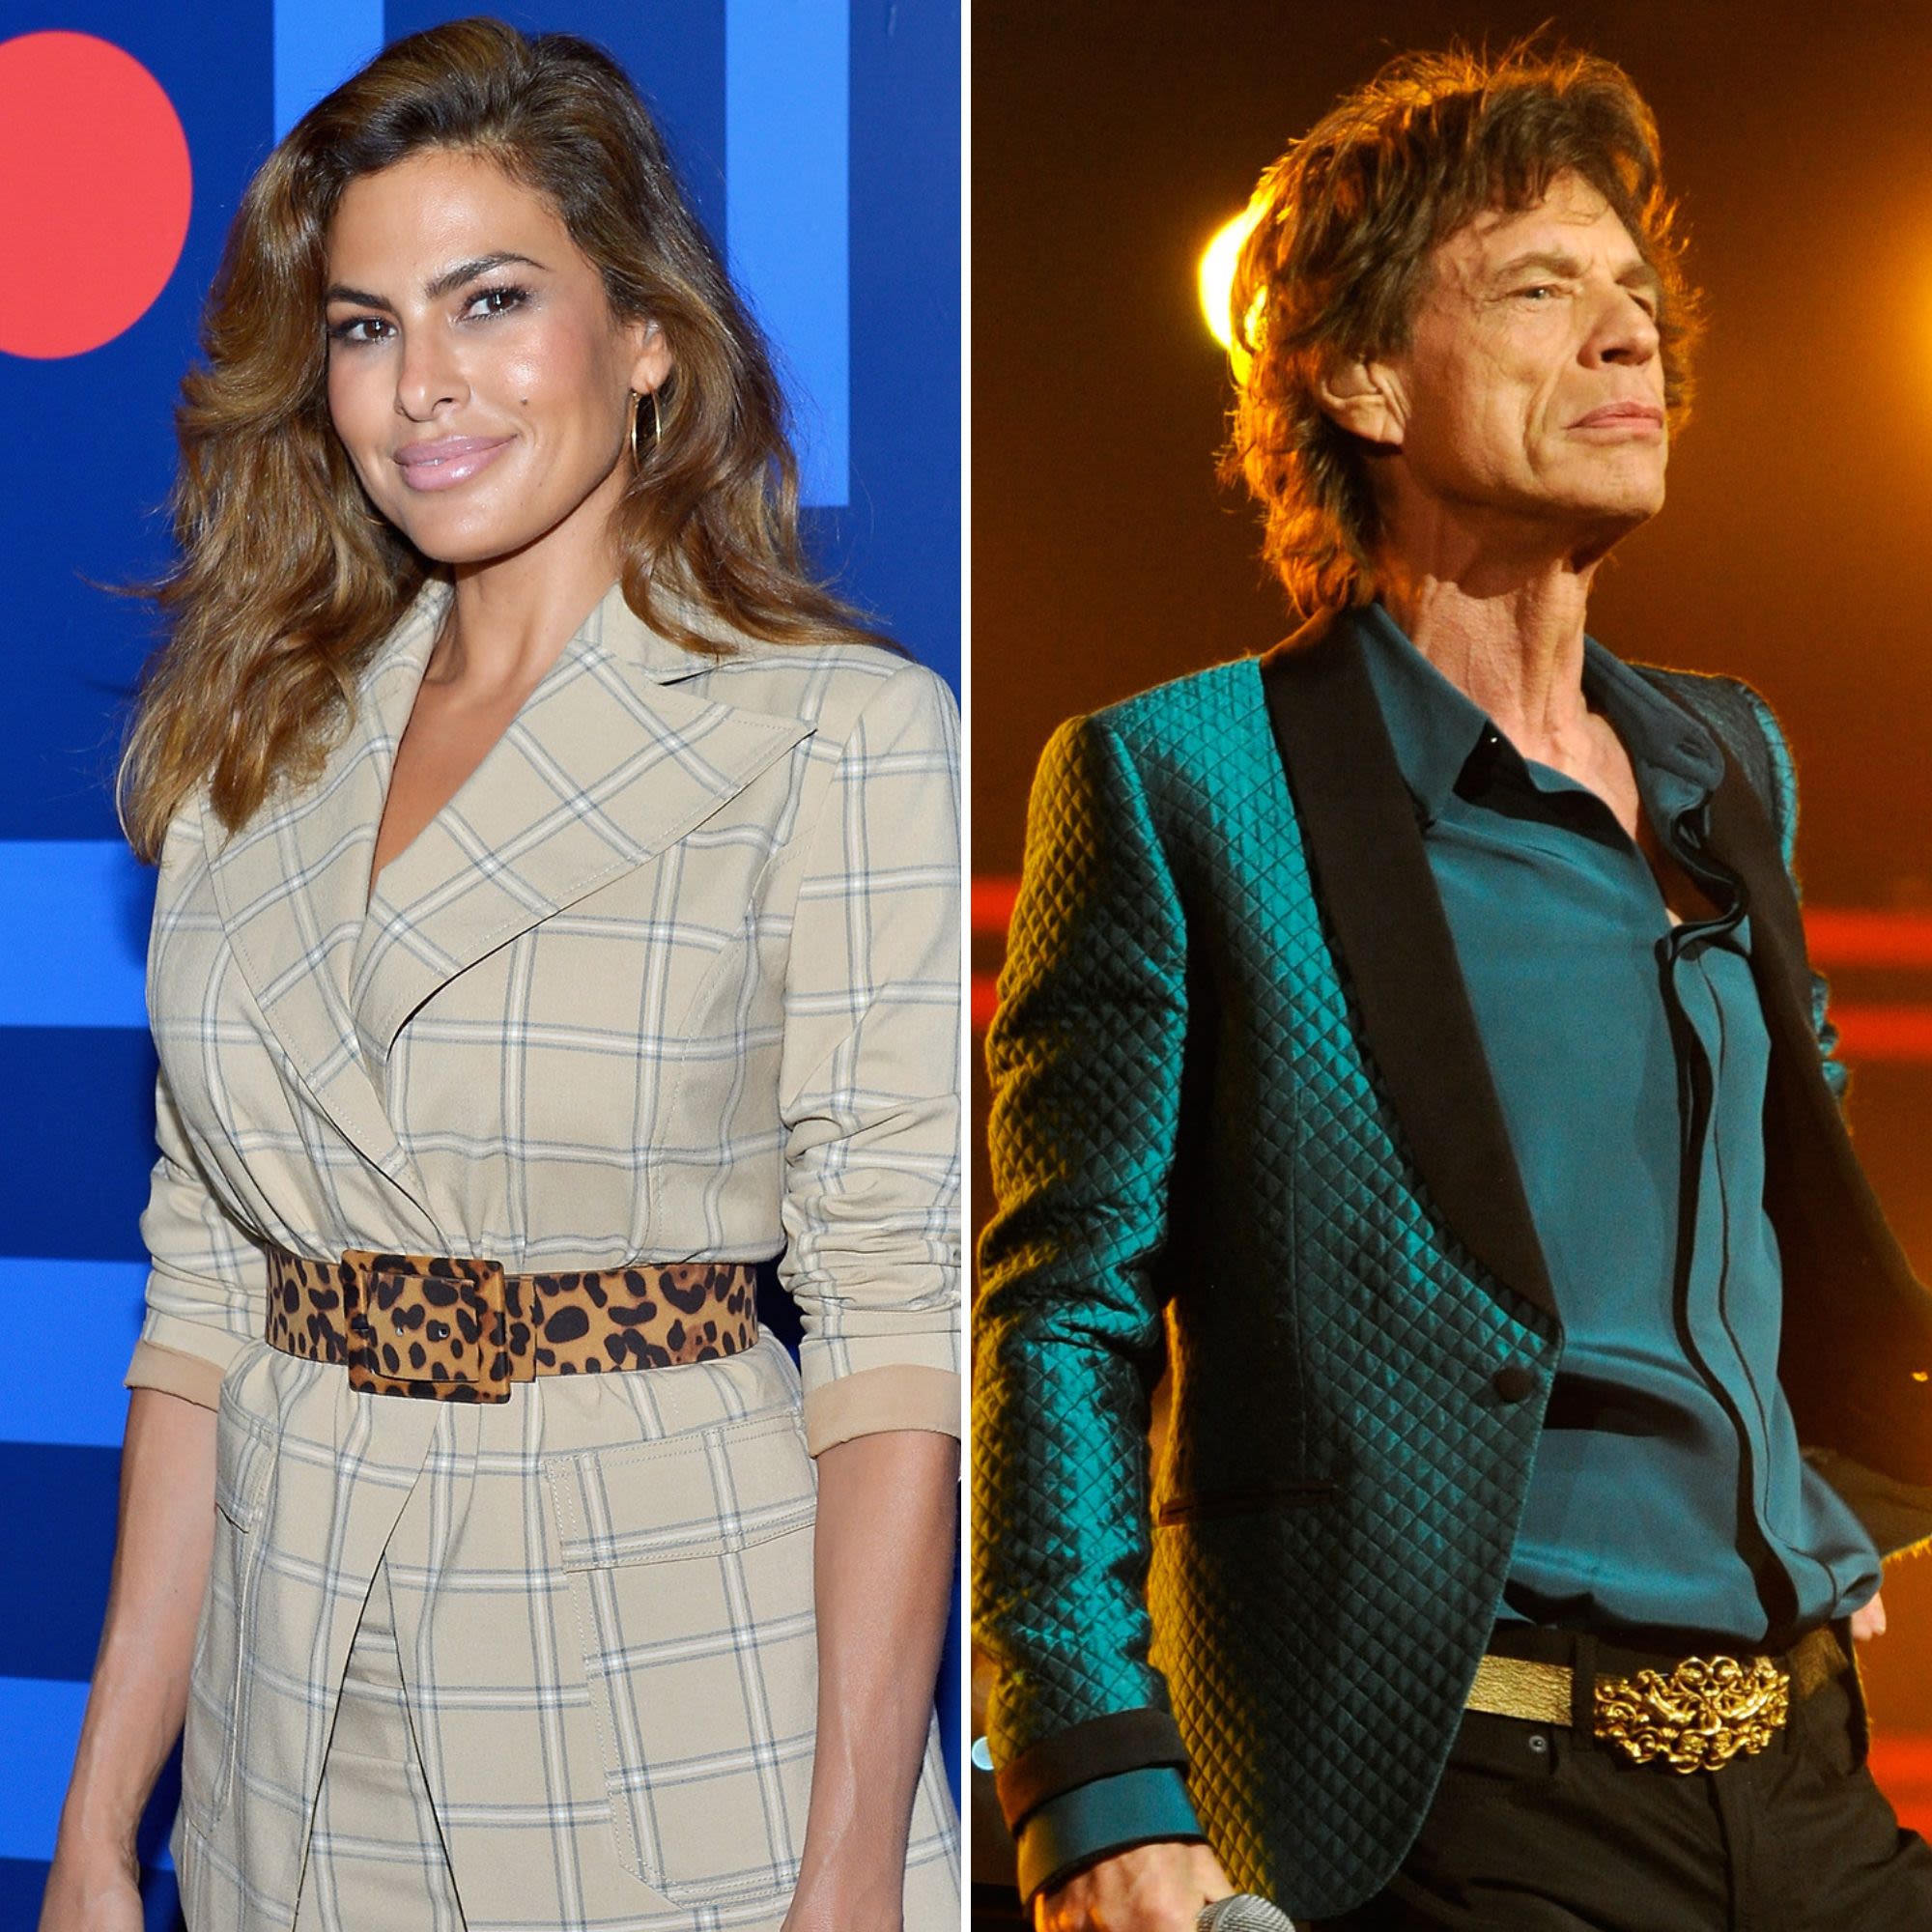 Eva Mendes Had a Secret Fling With Mick Jagger: ‘It Was a Crazy Period,’ Says Source